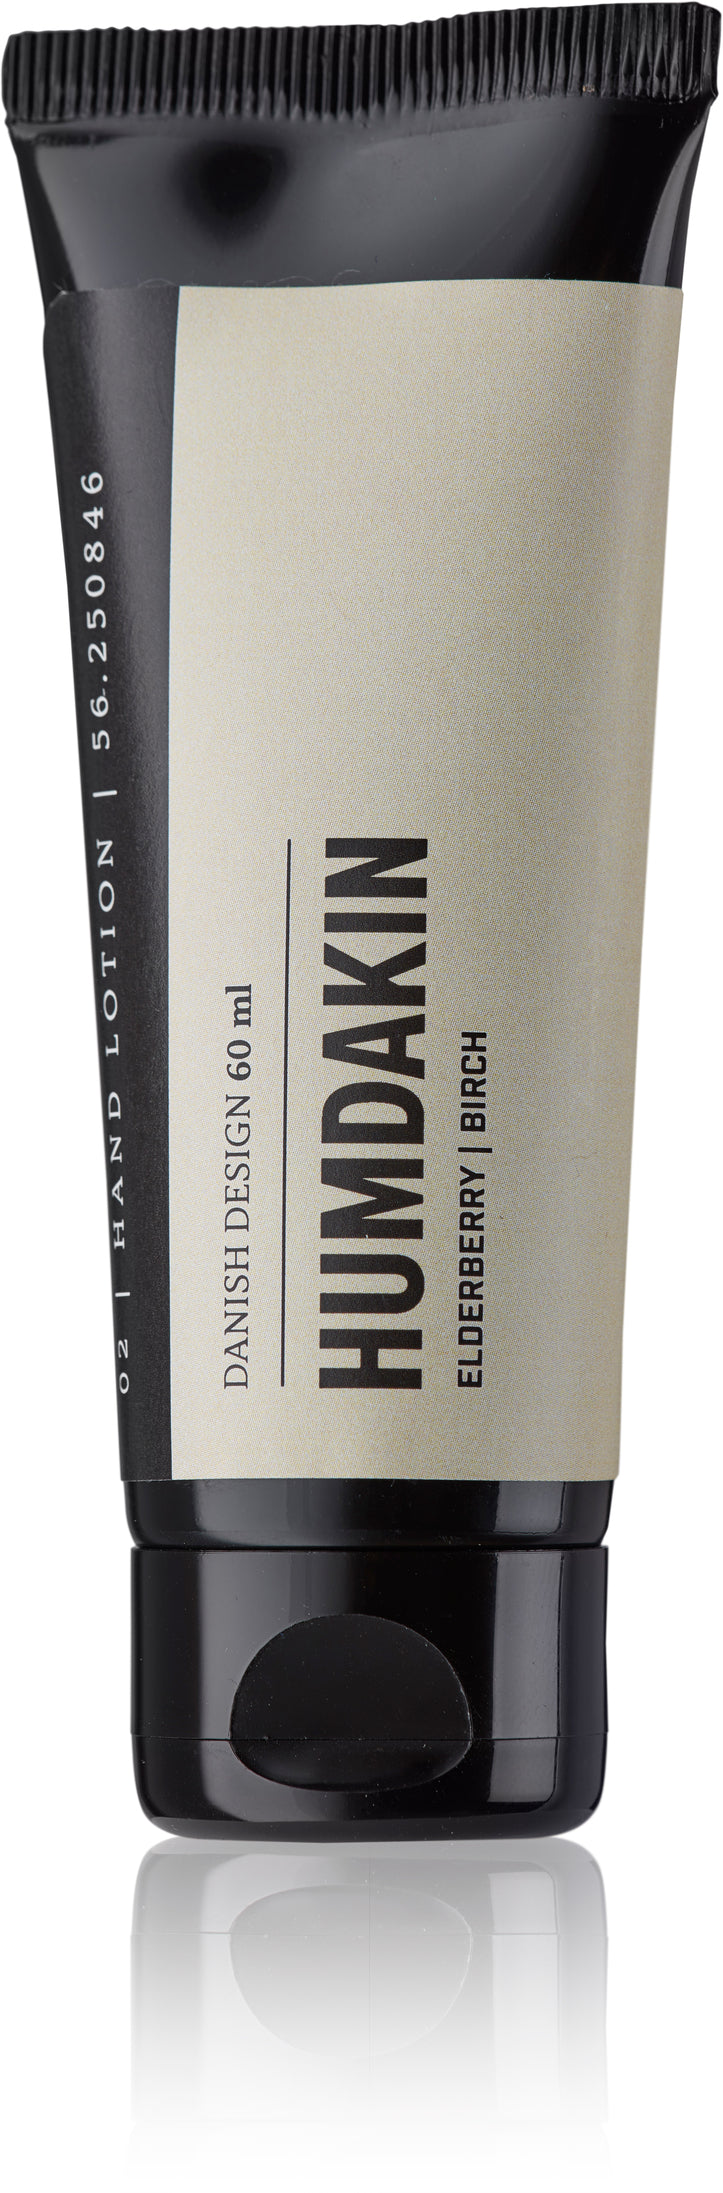 Hand lotion - Chamomile and Sea Buckthorn